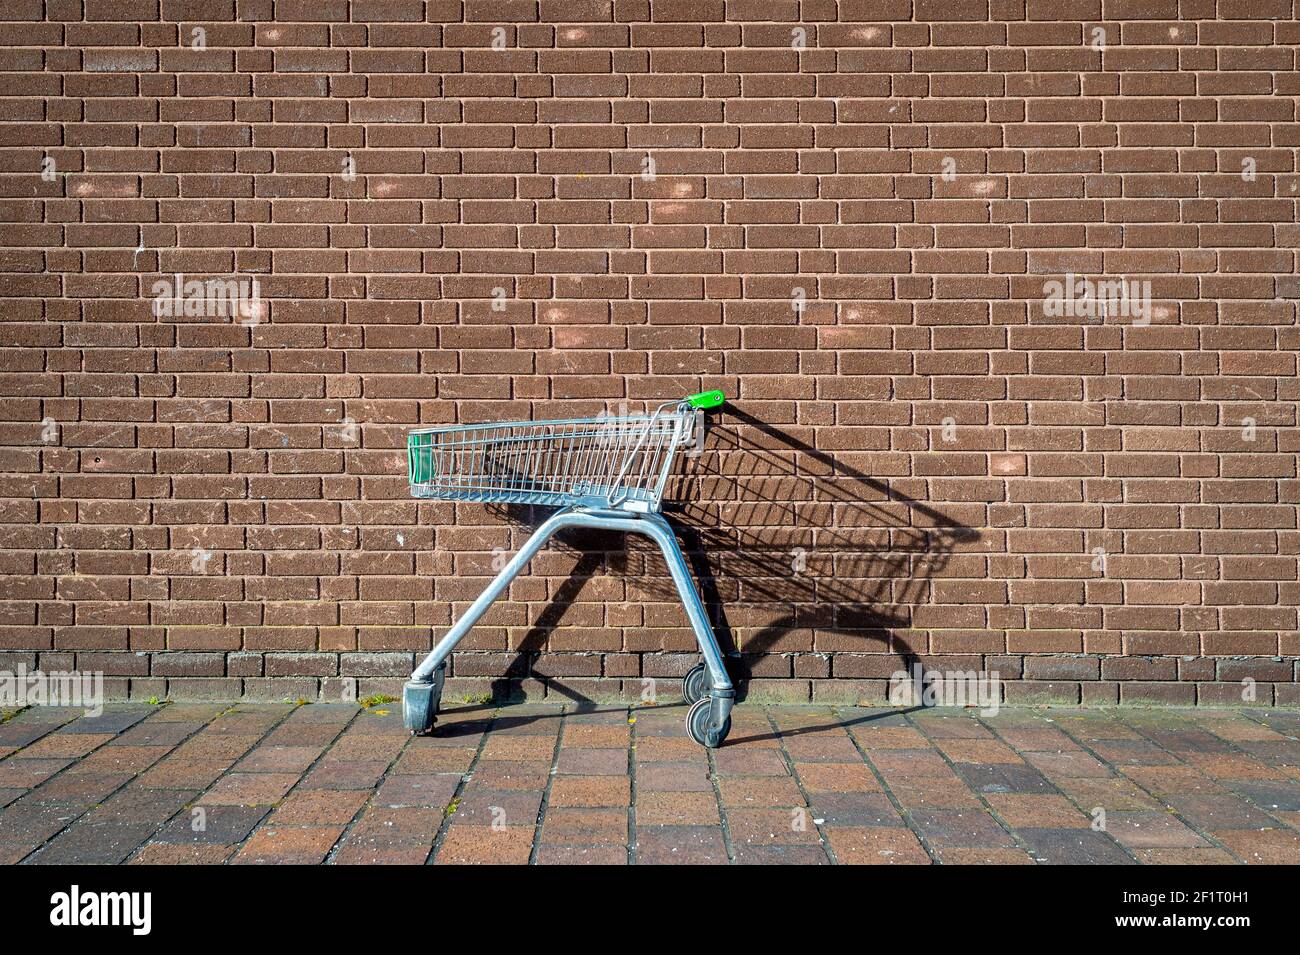 abandoned, empty supermarket trolley by a brick wall, shopping concept. Stock Photo